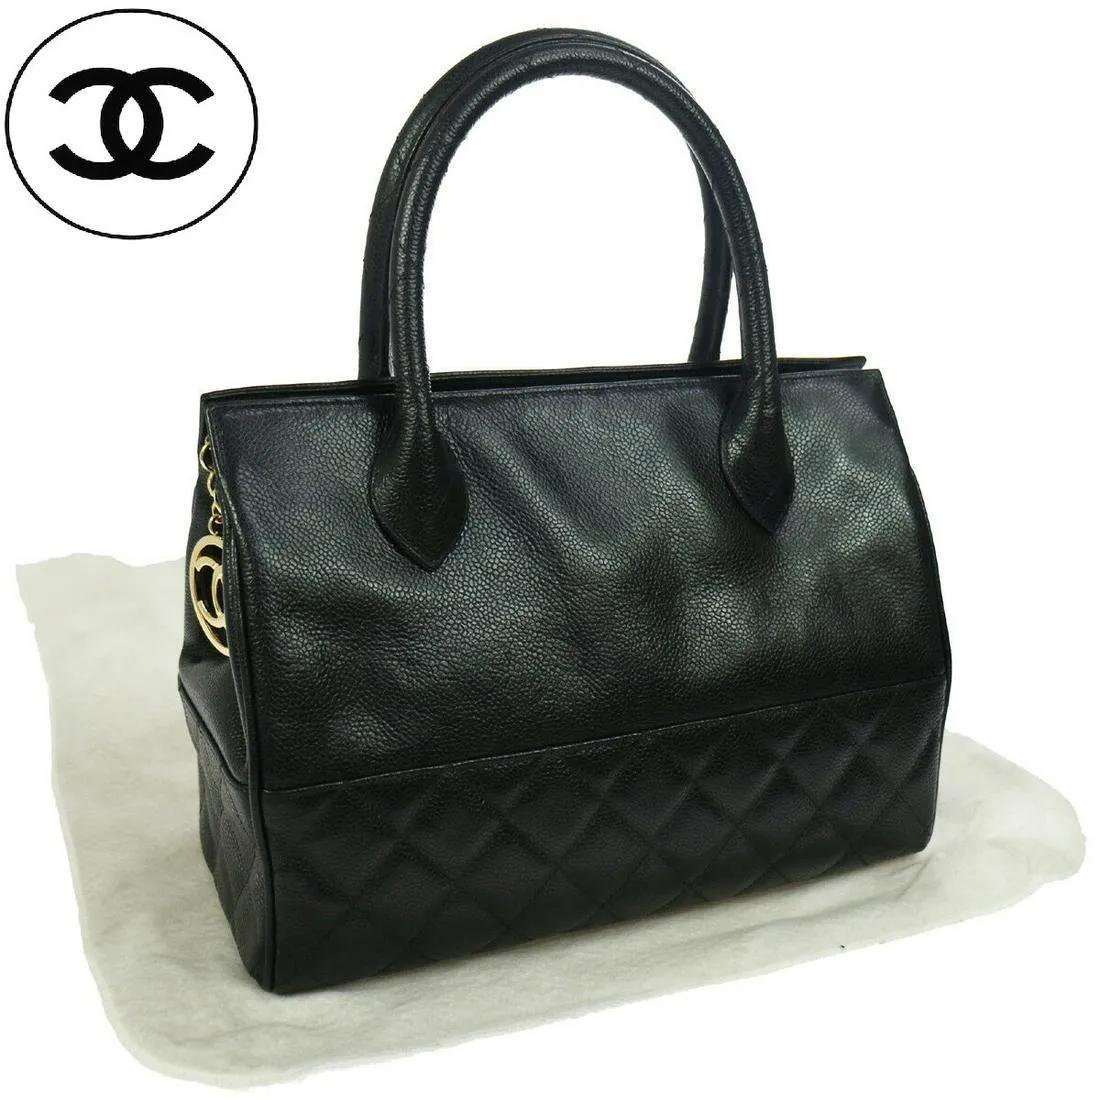 Authentic Chanel Runway Black Caviar Doctors Handbag Gold Accent.

Italian Caviar leather Doctors hand bag with Chanel CC Gold accents. Zipper enclosure and buckle provide a clean aesthetic to this beautifully caviar leather bag. The top straps are